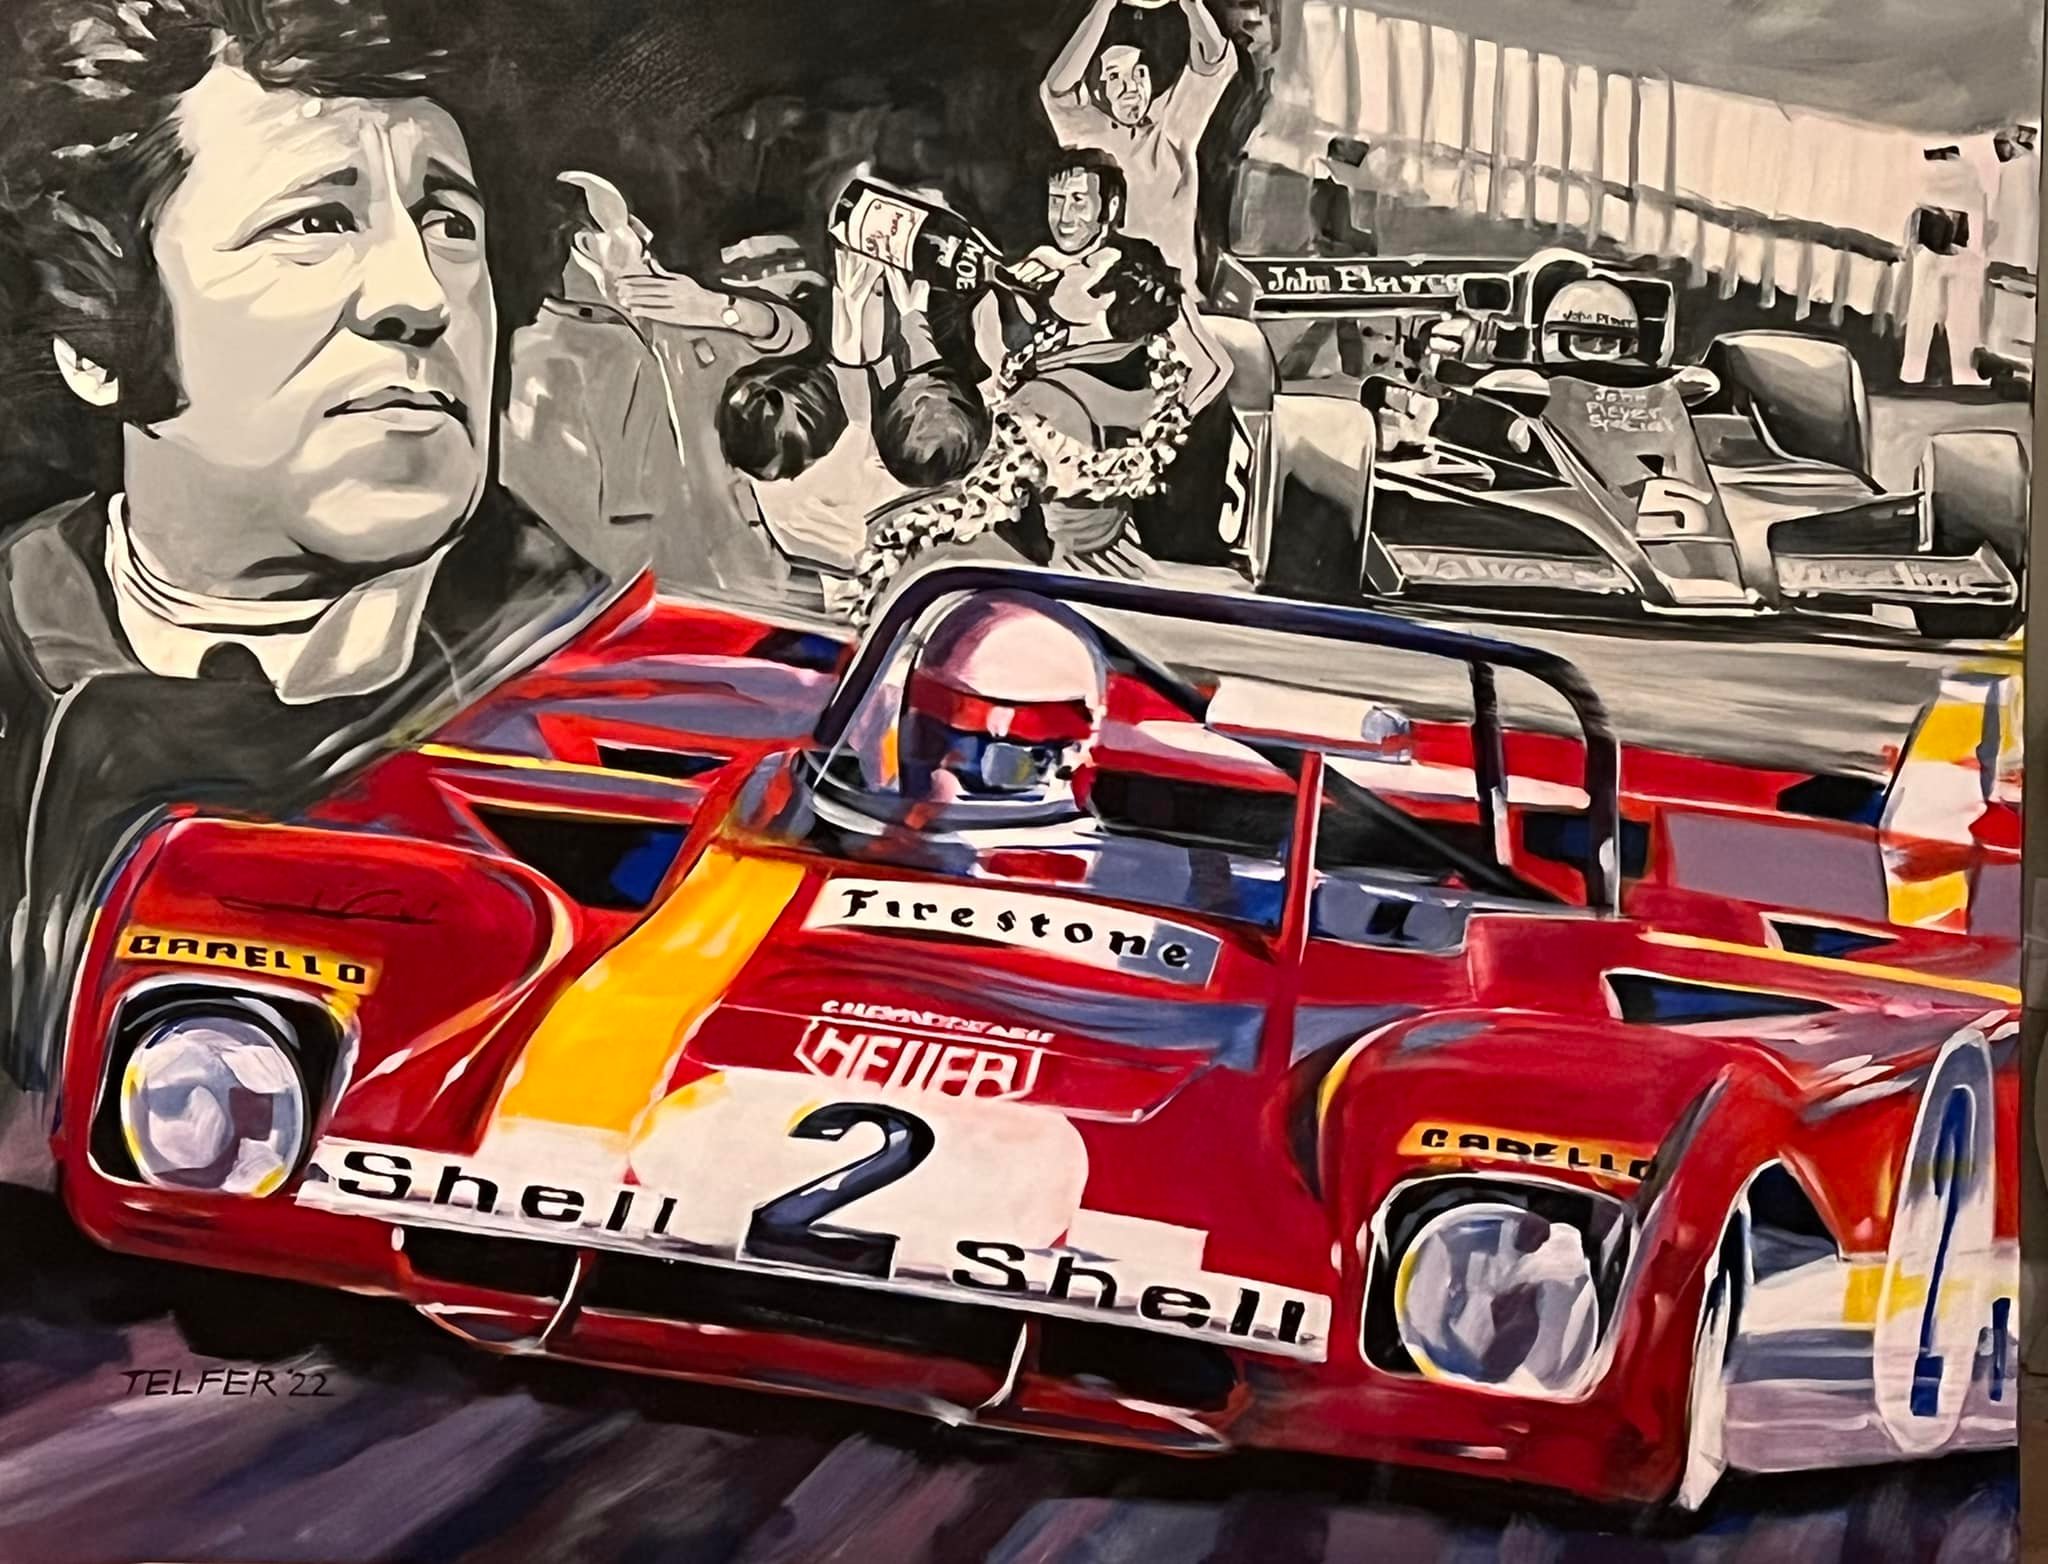 Kelly Telfer painting titled “Mario Andretti - a True Champion”, signed by Mario Andretti, raised $138,000 at auction for charity Spina Bifida of Jacksonville